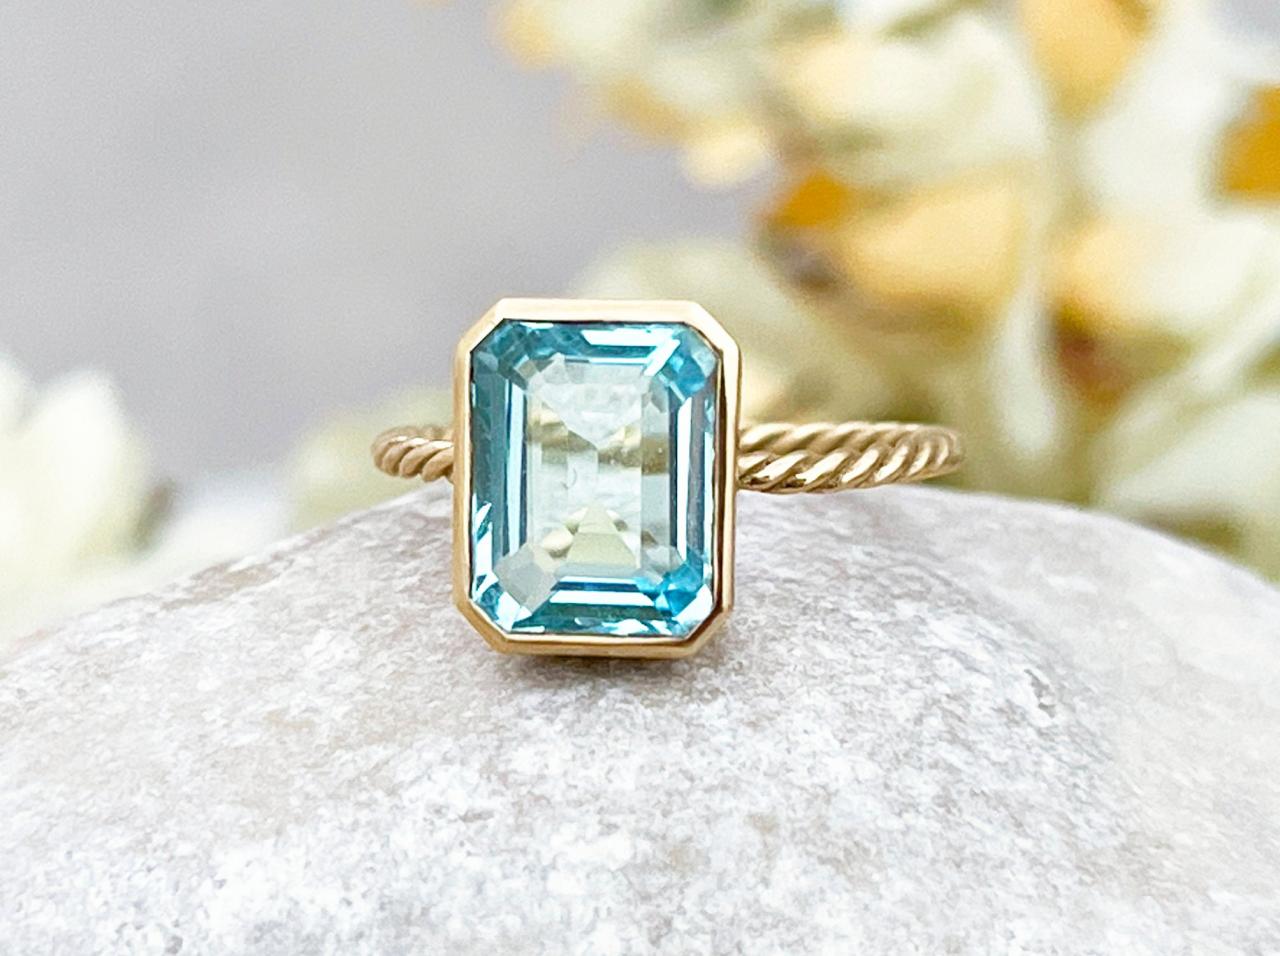 Blue topaz solid gold solitaire engagement ring, Natural emerald cut light blue stone proposal ring, 18k modern style twist ring